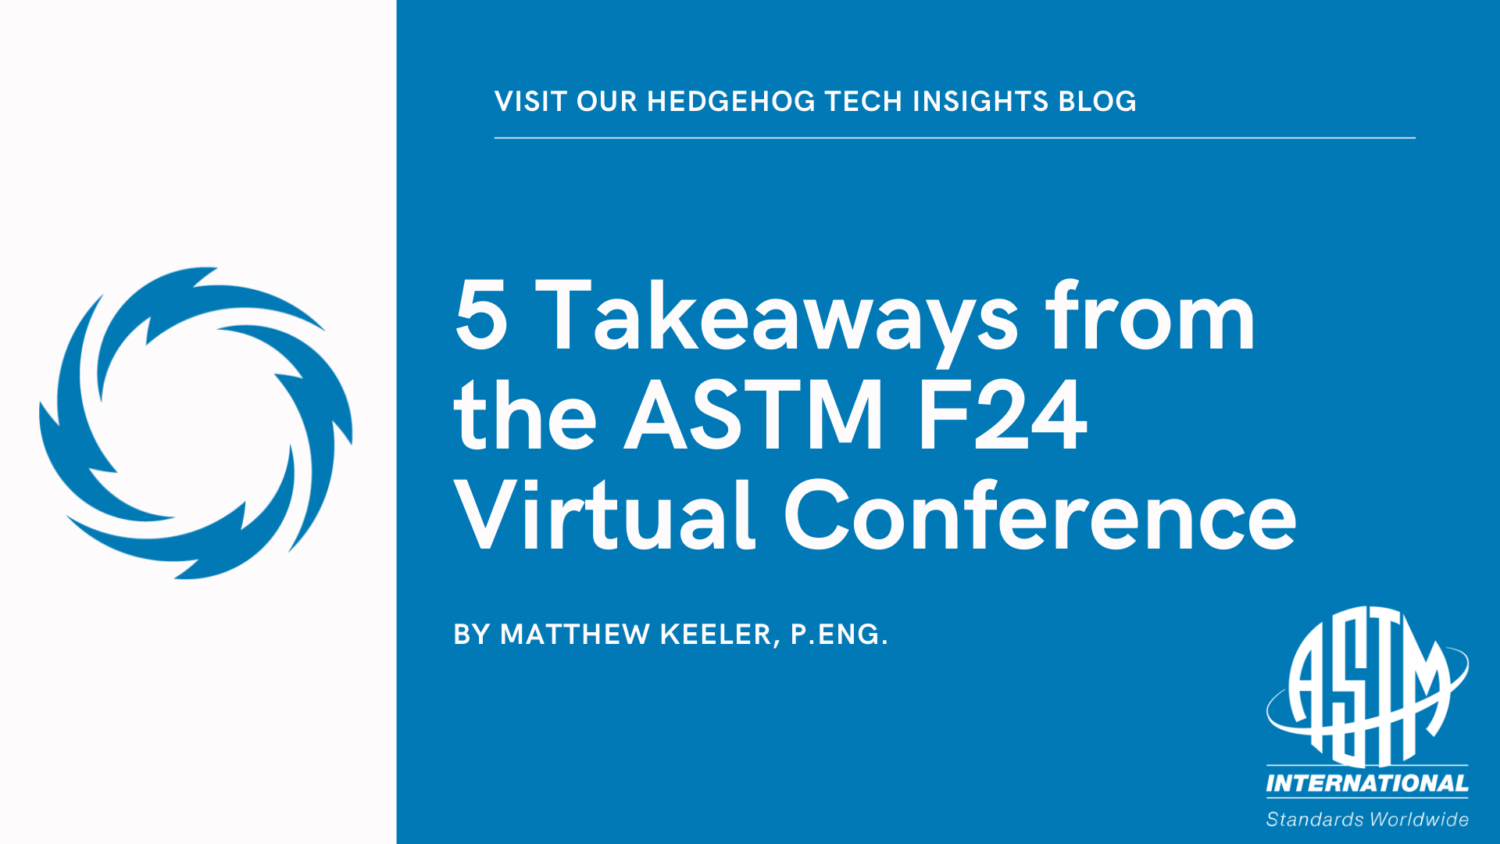 5 Takeaways from the ASTM F24 Virtual Conference Hedgehog Technologies